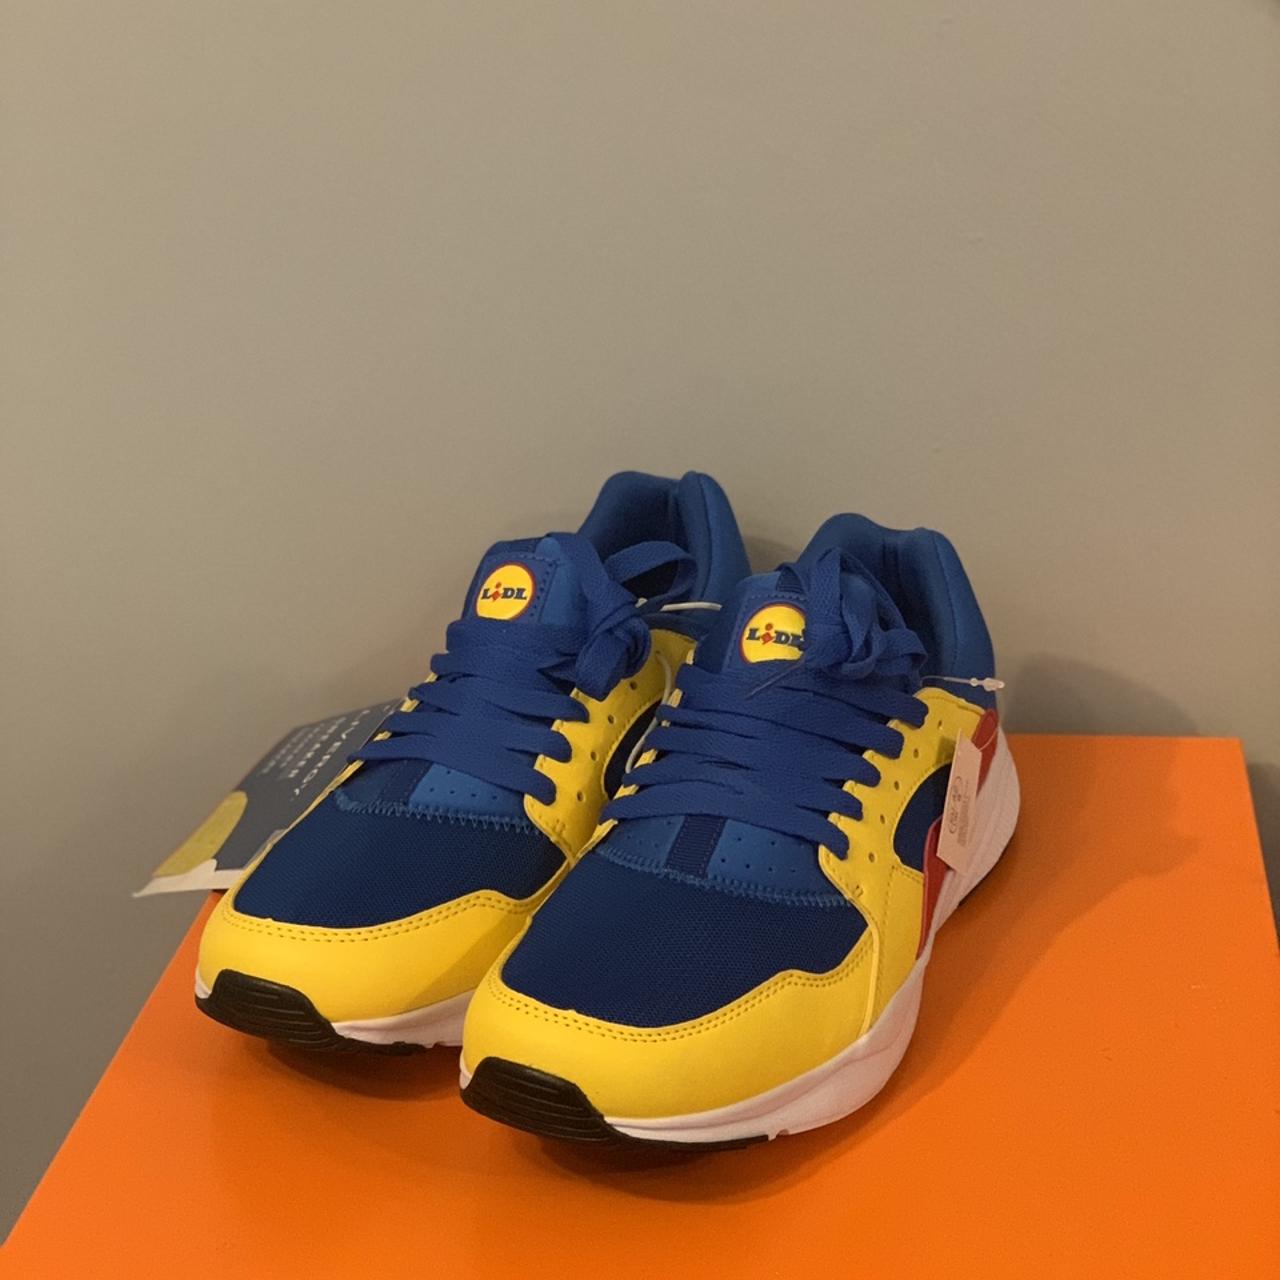 Lidl Trainers/Shoes. BRAND NEW. UK 9, 10, 11 - Depop